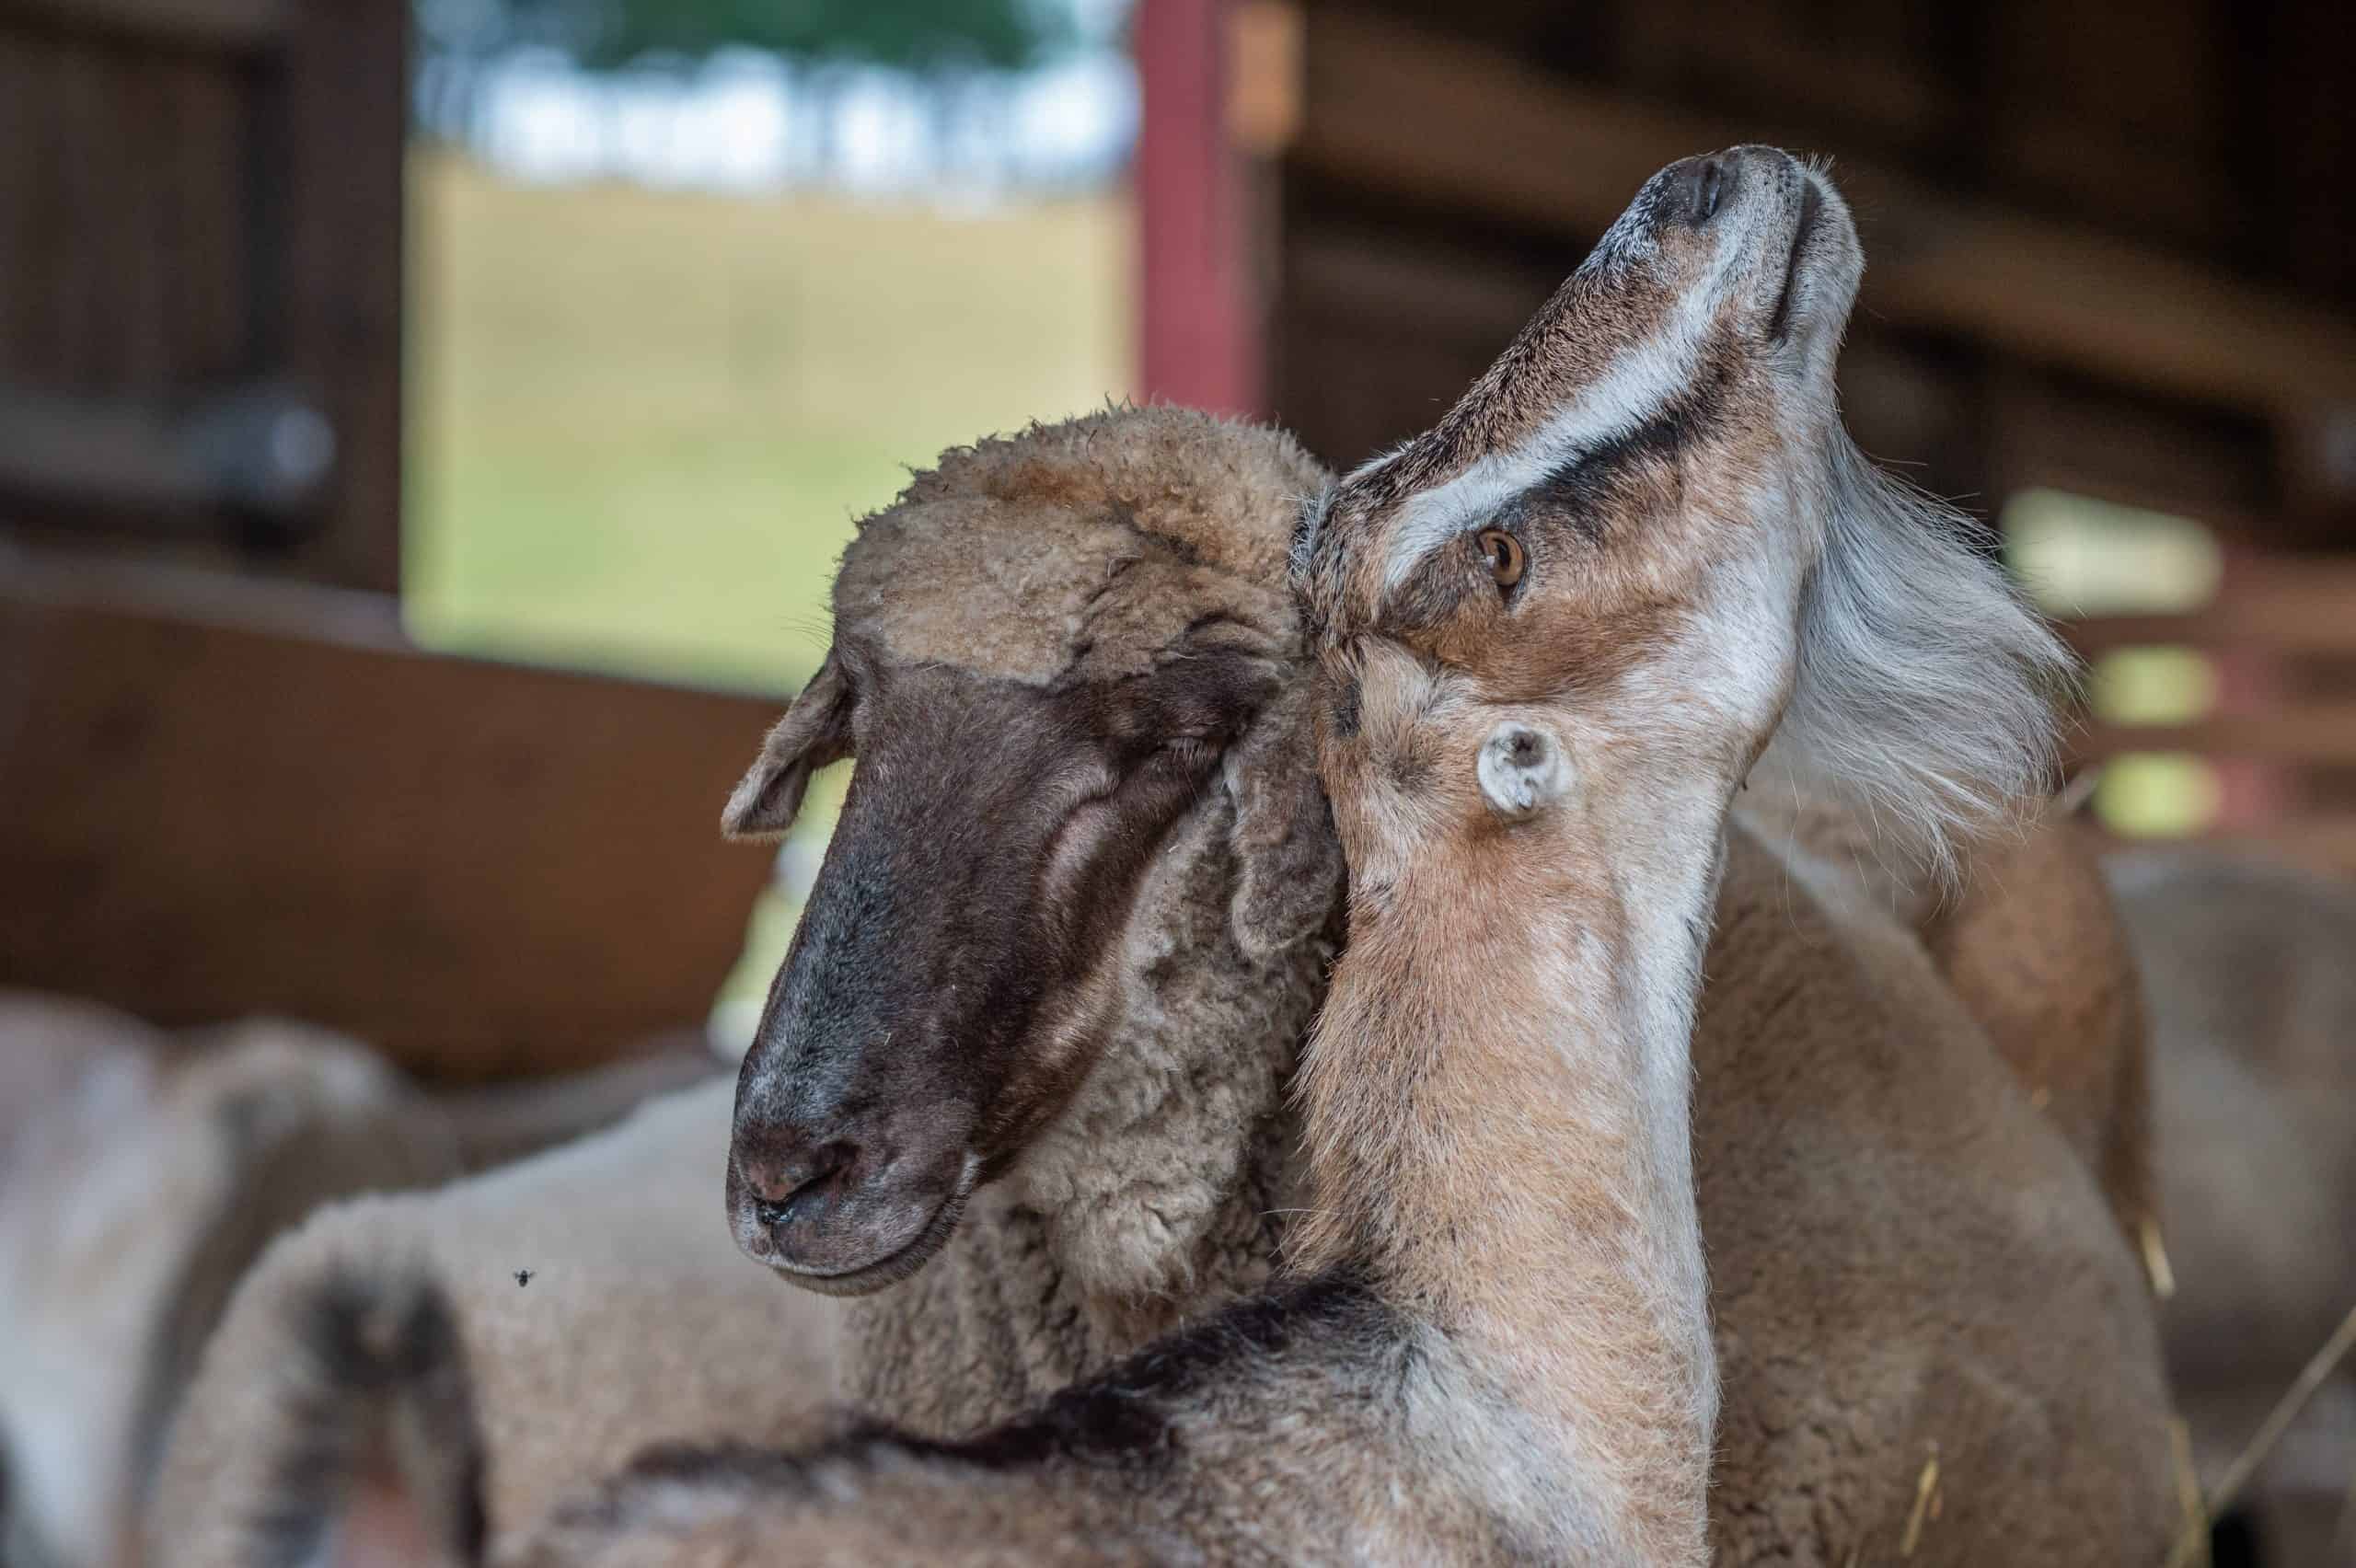 Safe Cohabitation Considerations For Goats - The Open Sanctuary Project